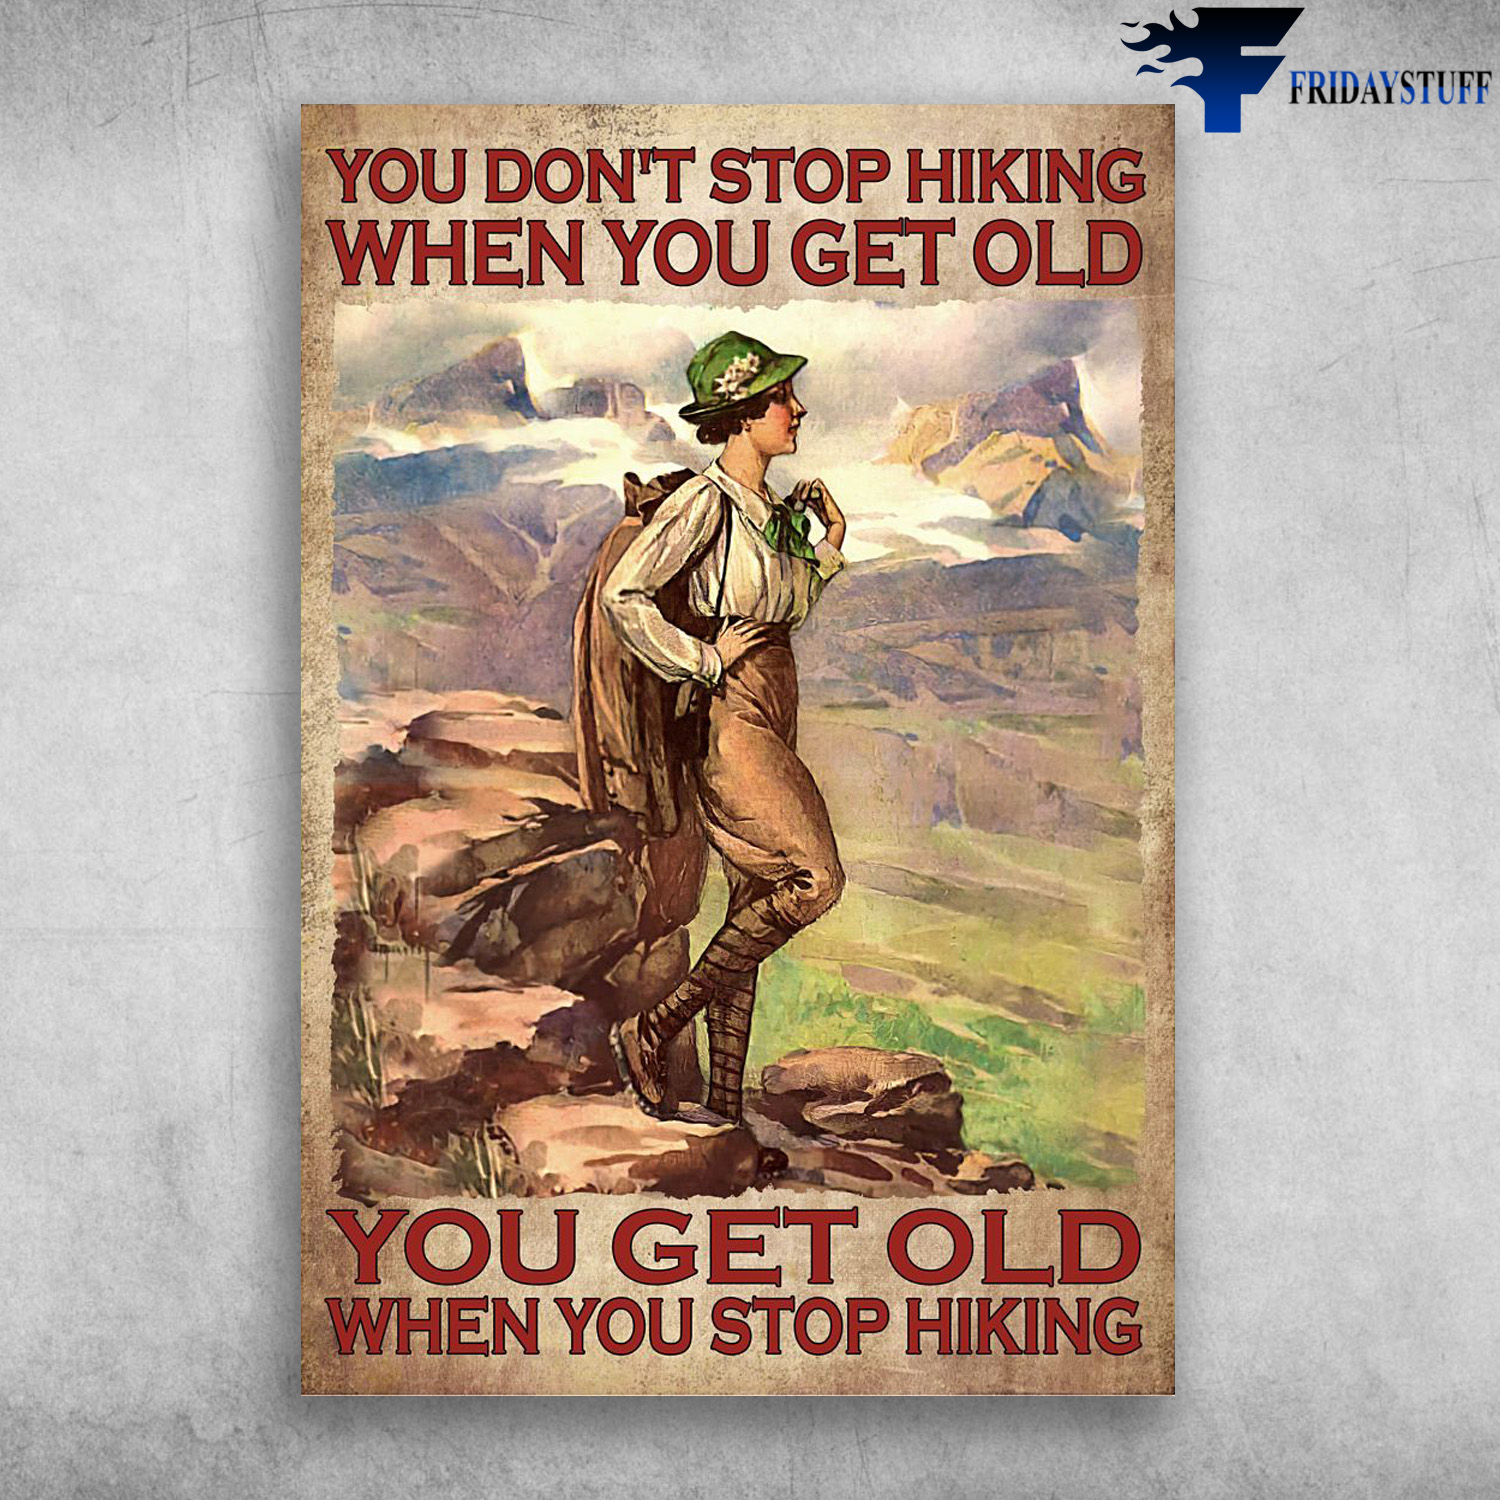 Girl Hiking - You Don't Stop Hiking When You Get Old, You Get Old When You Stop Hiking